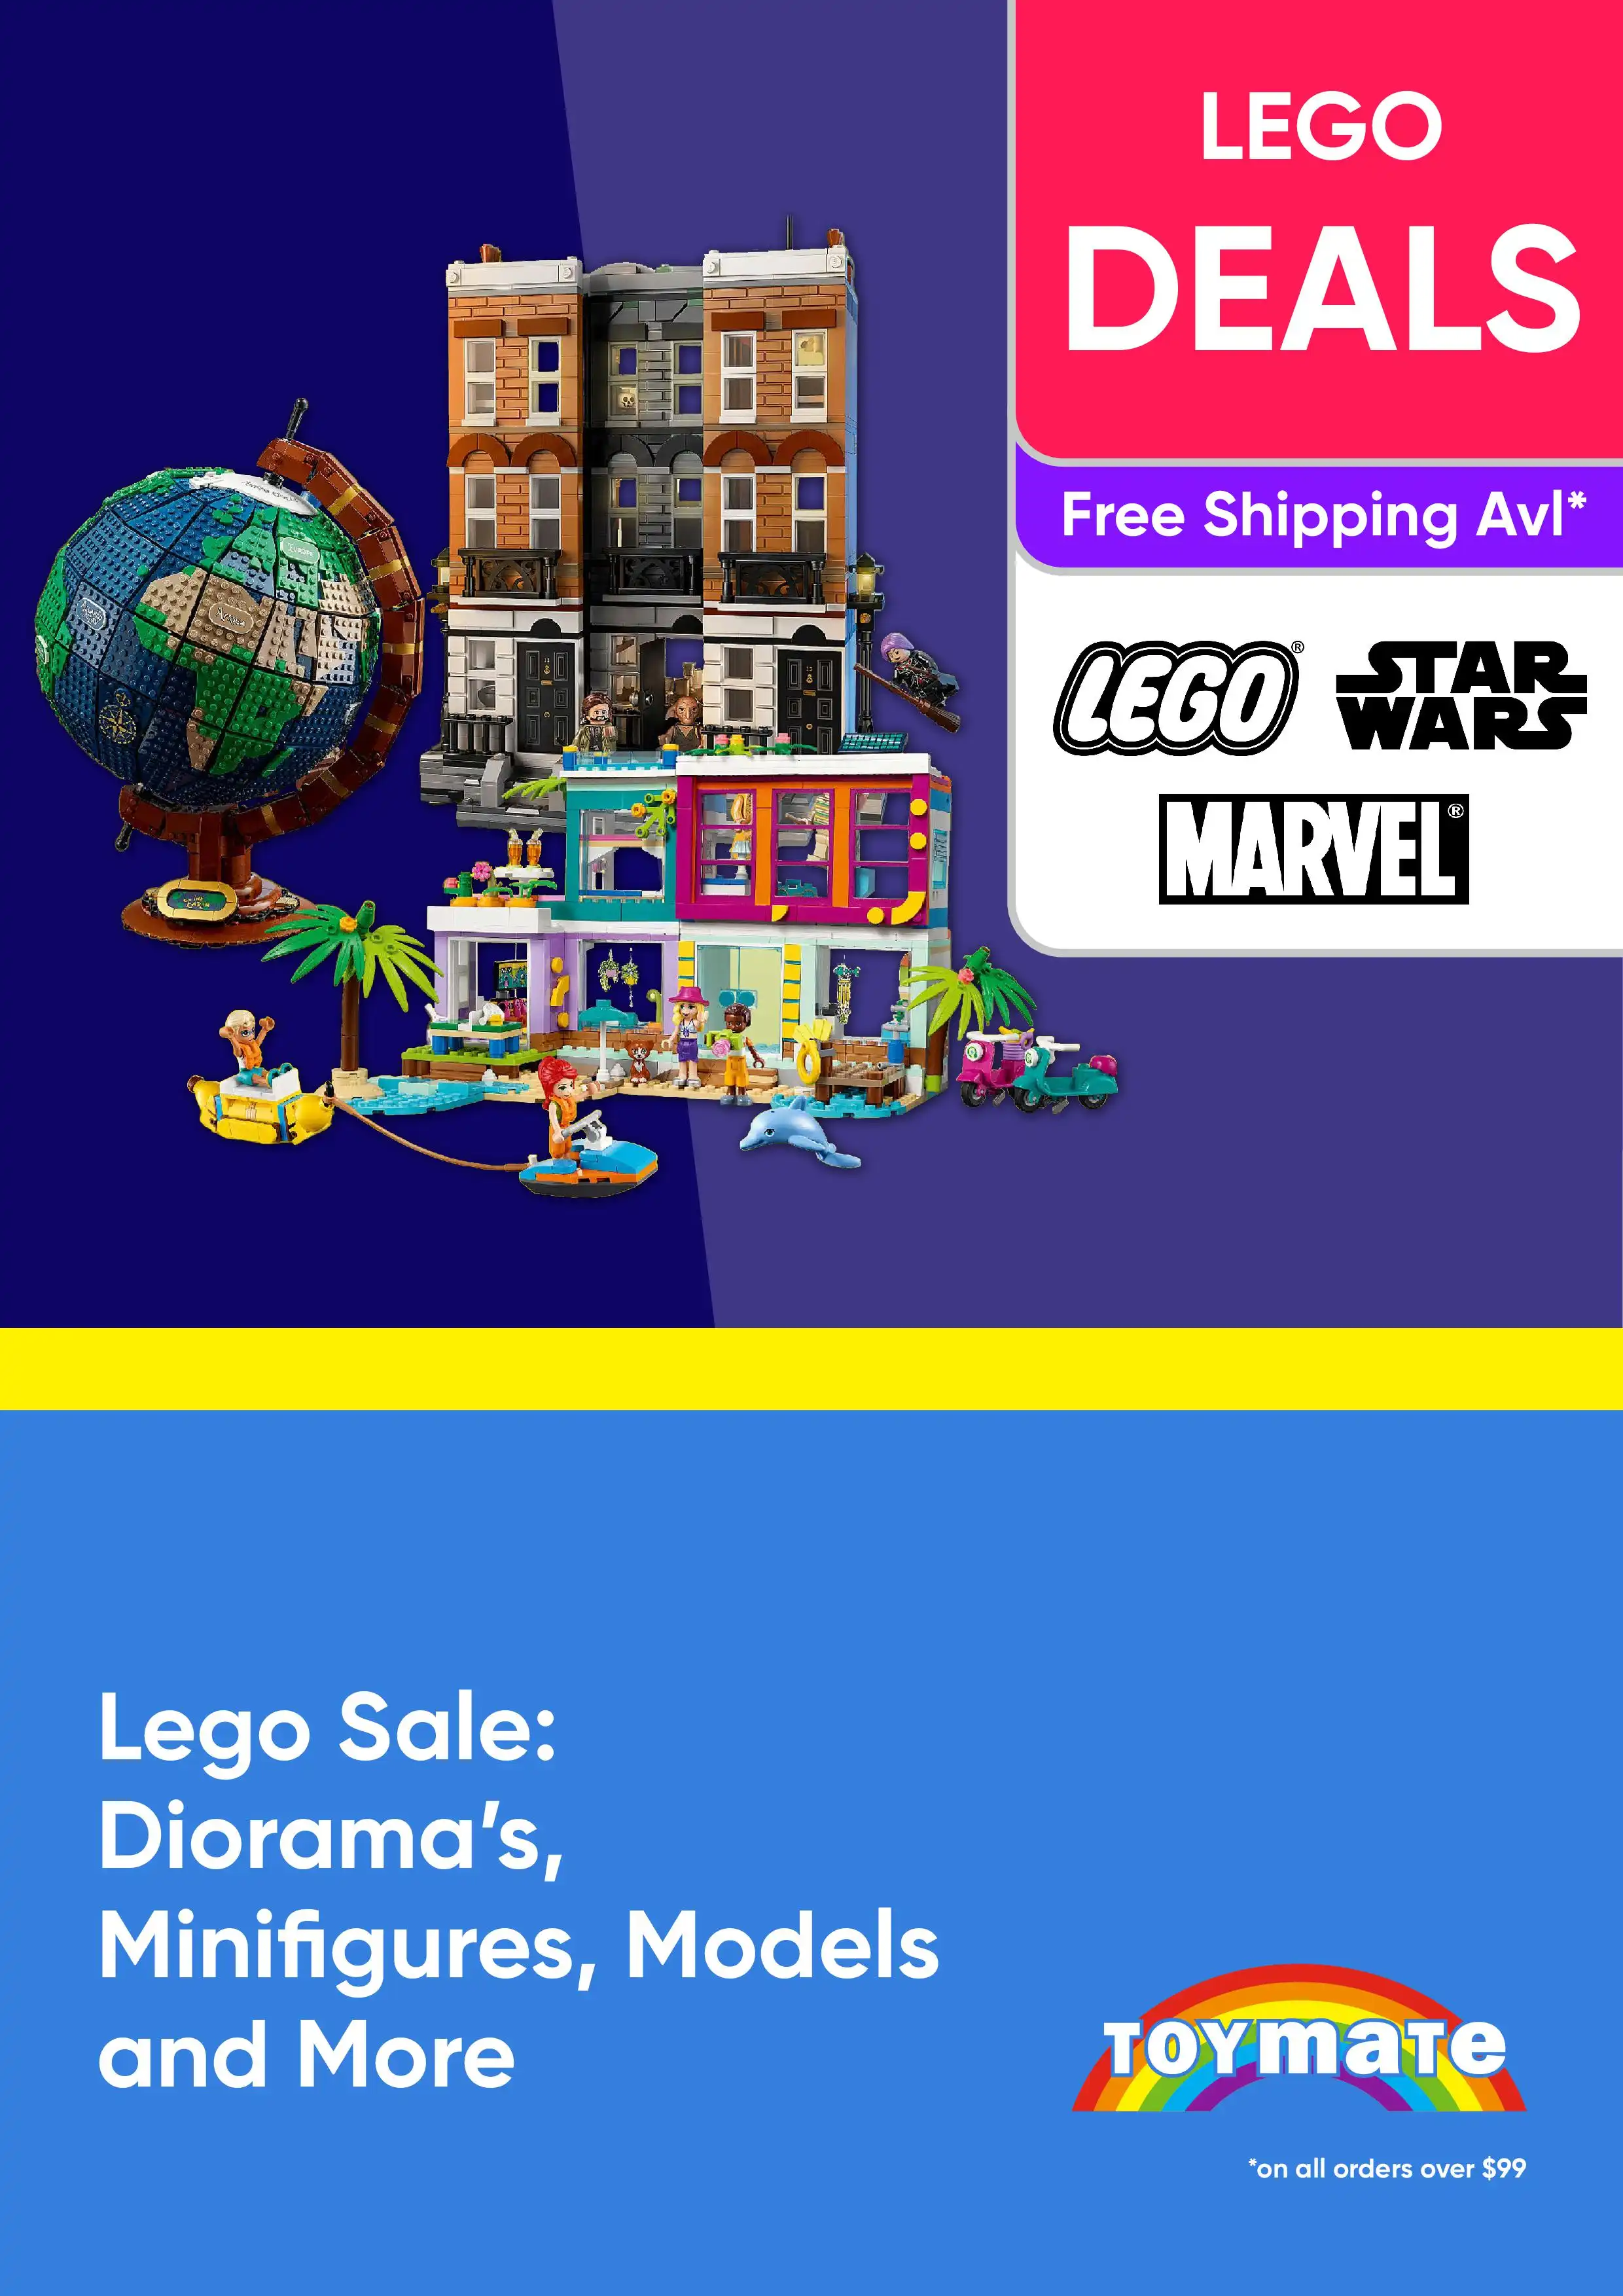 Lego Sale - Diorama's, Minifigures, Models and More - Lego, Star Wars, Marvel